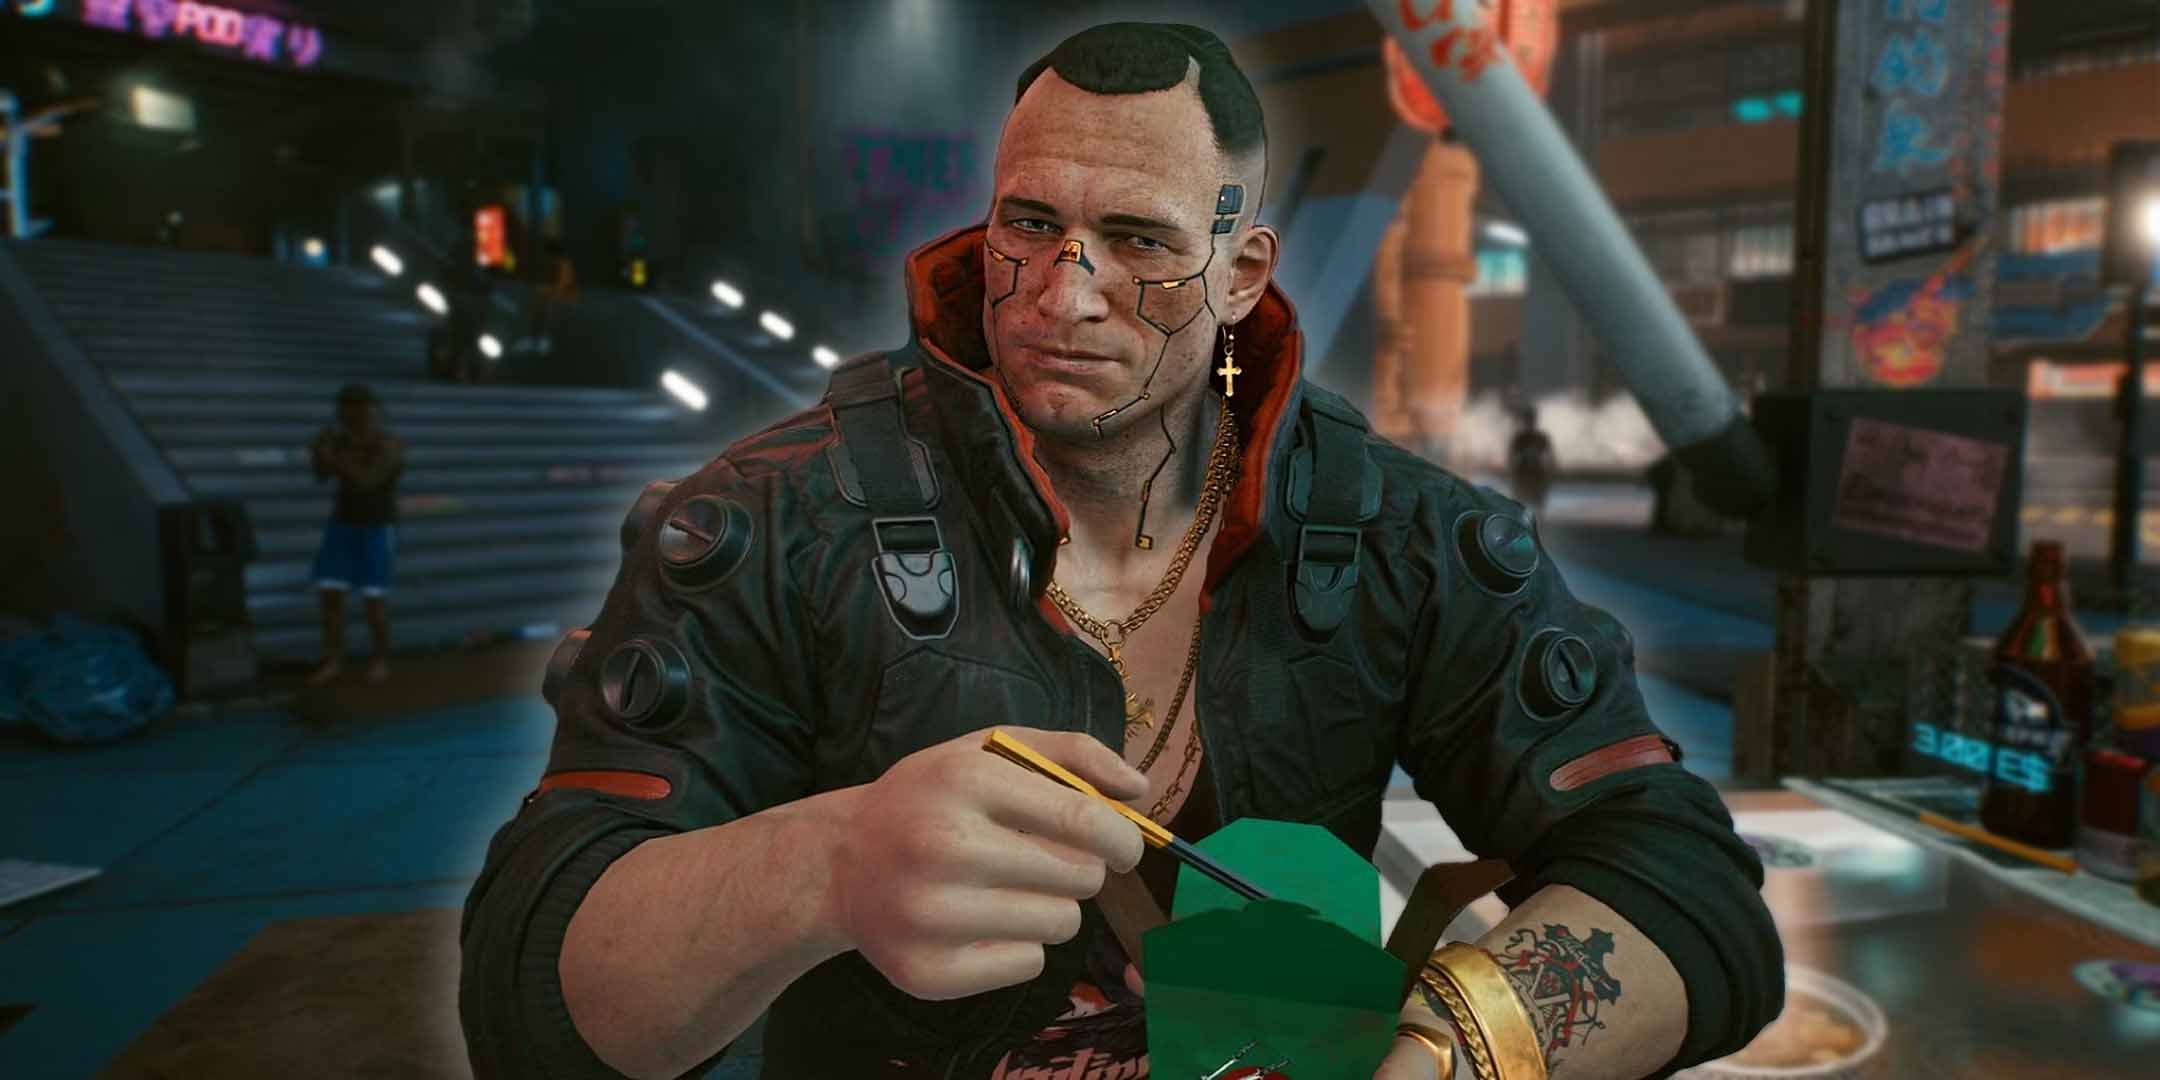 Jackie from Cyberpunk 2077 eating lunch